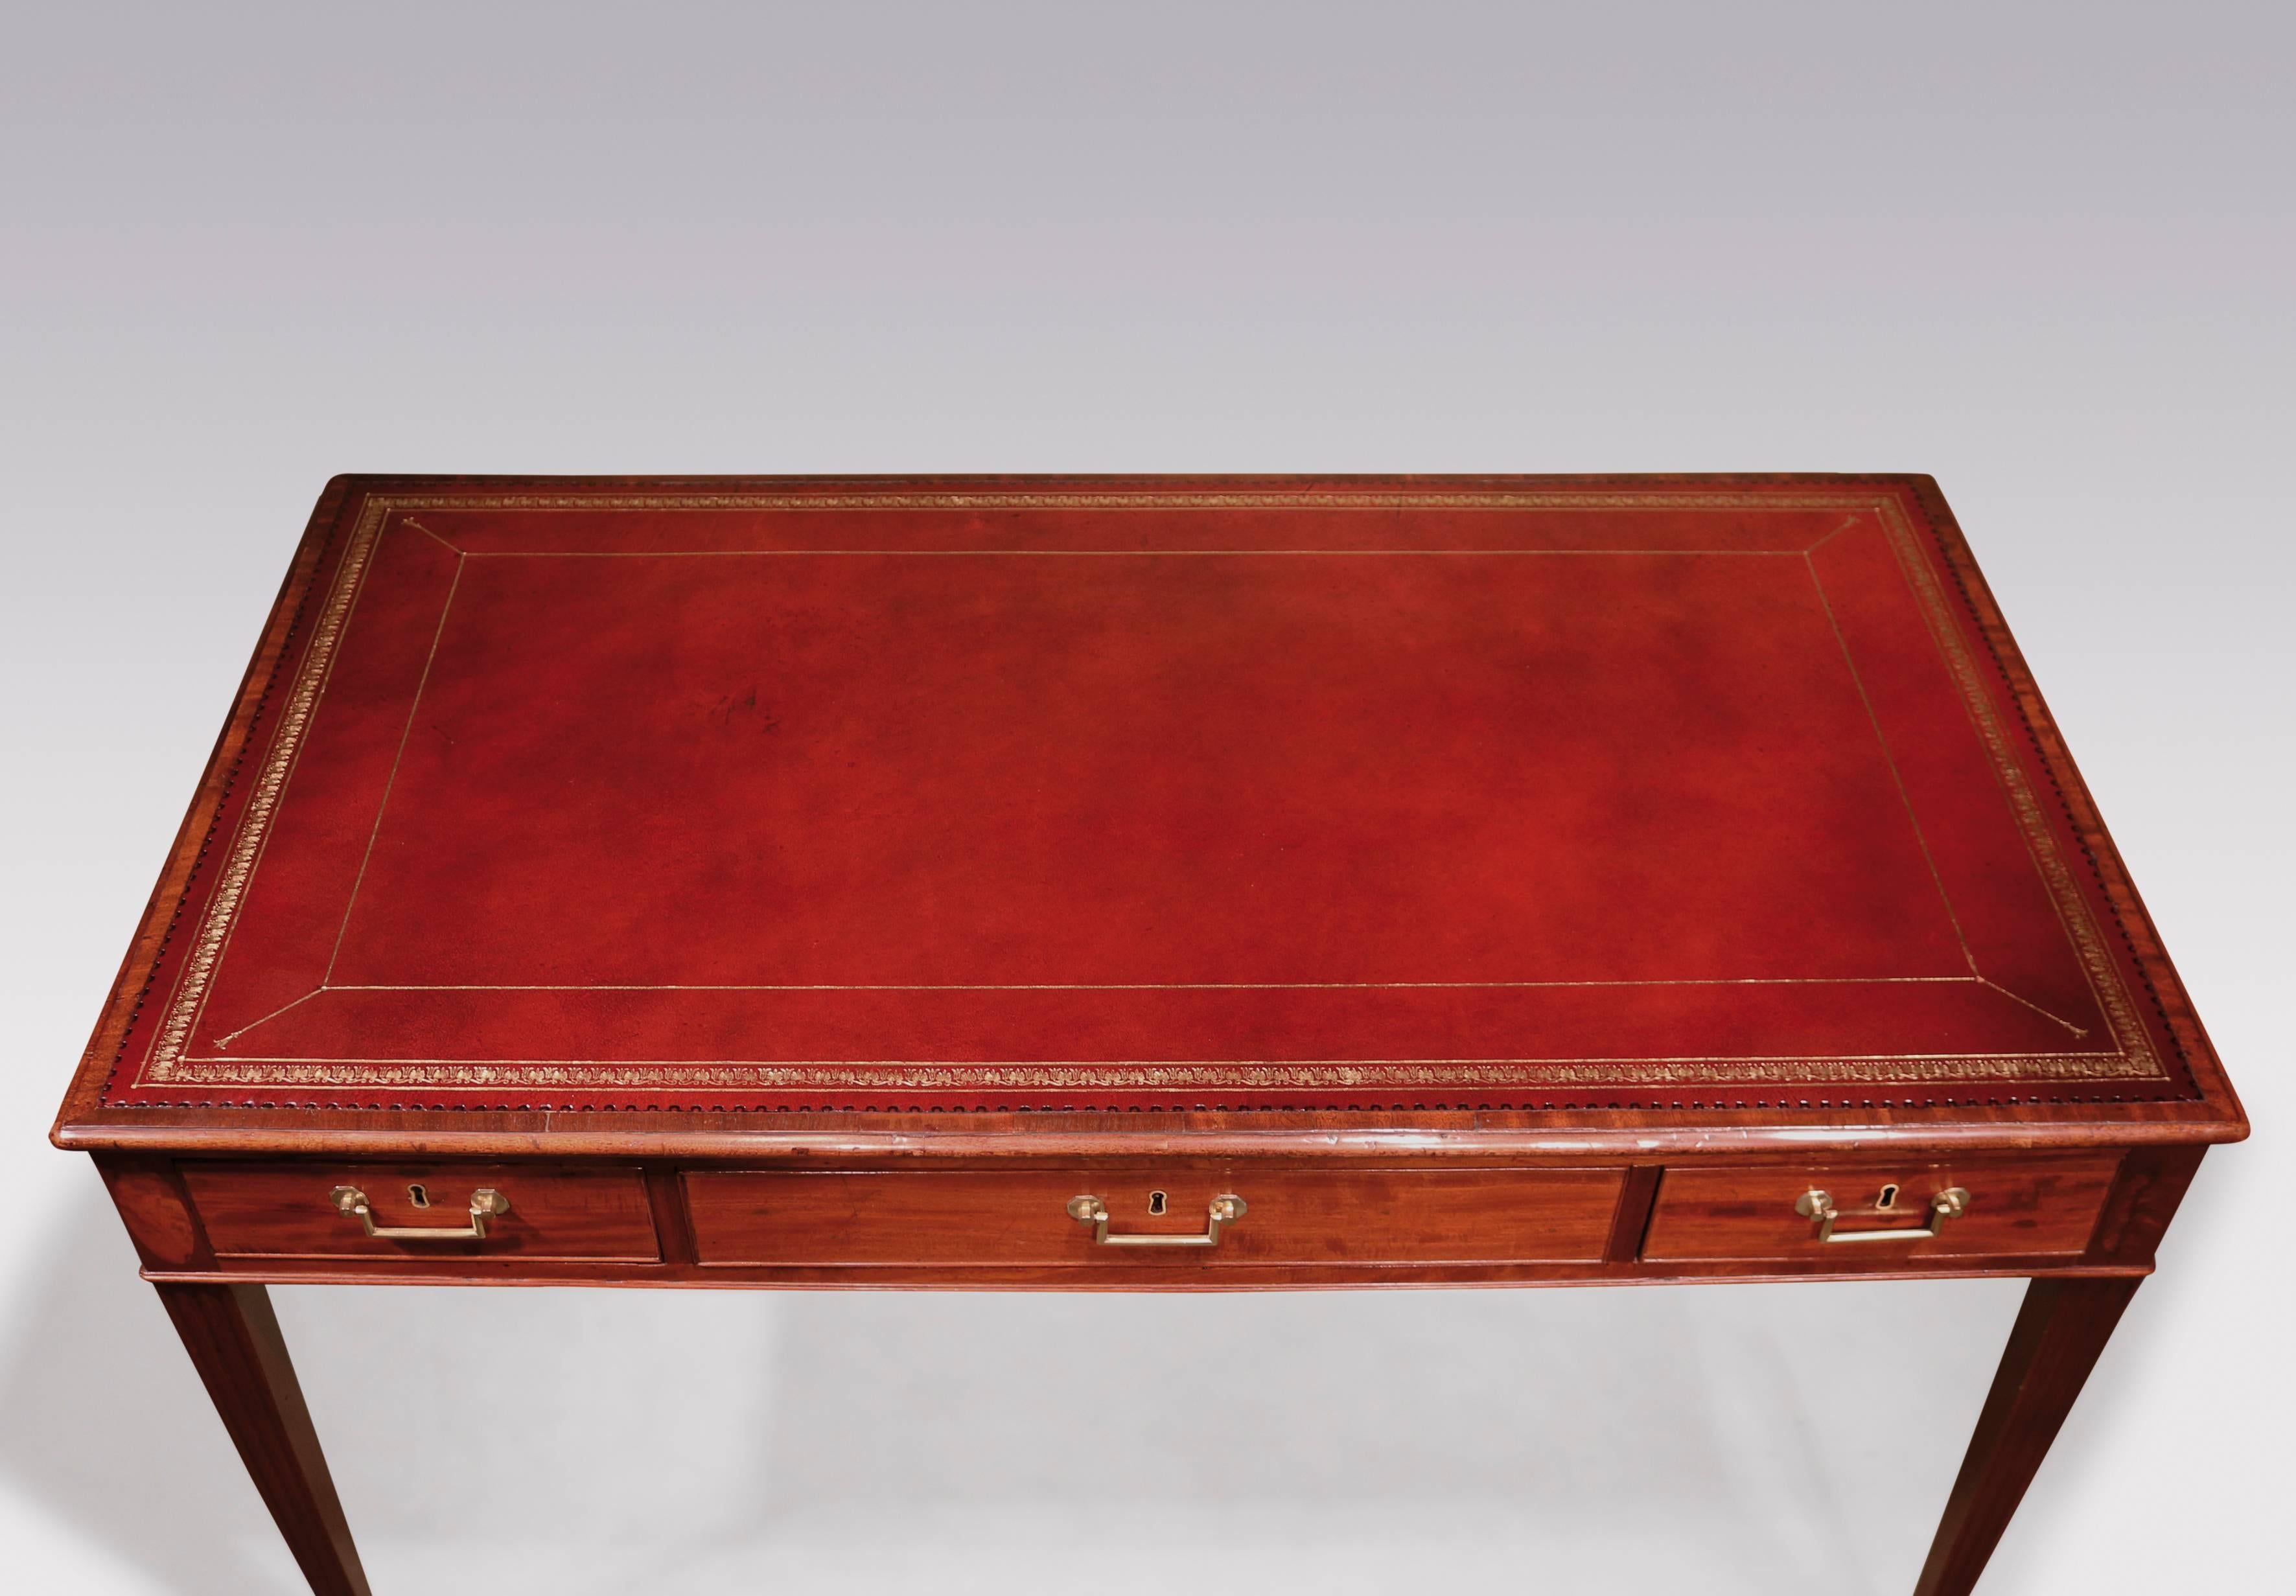 A late 18th century George III period well figured mahogany writing table, having a moulded edged red gilt tooled leather top, above six cockbeaded drawers retaining original handles, supported on fluted square tapering legs with veneered oval